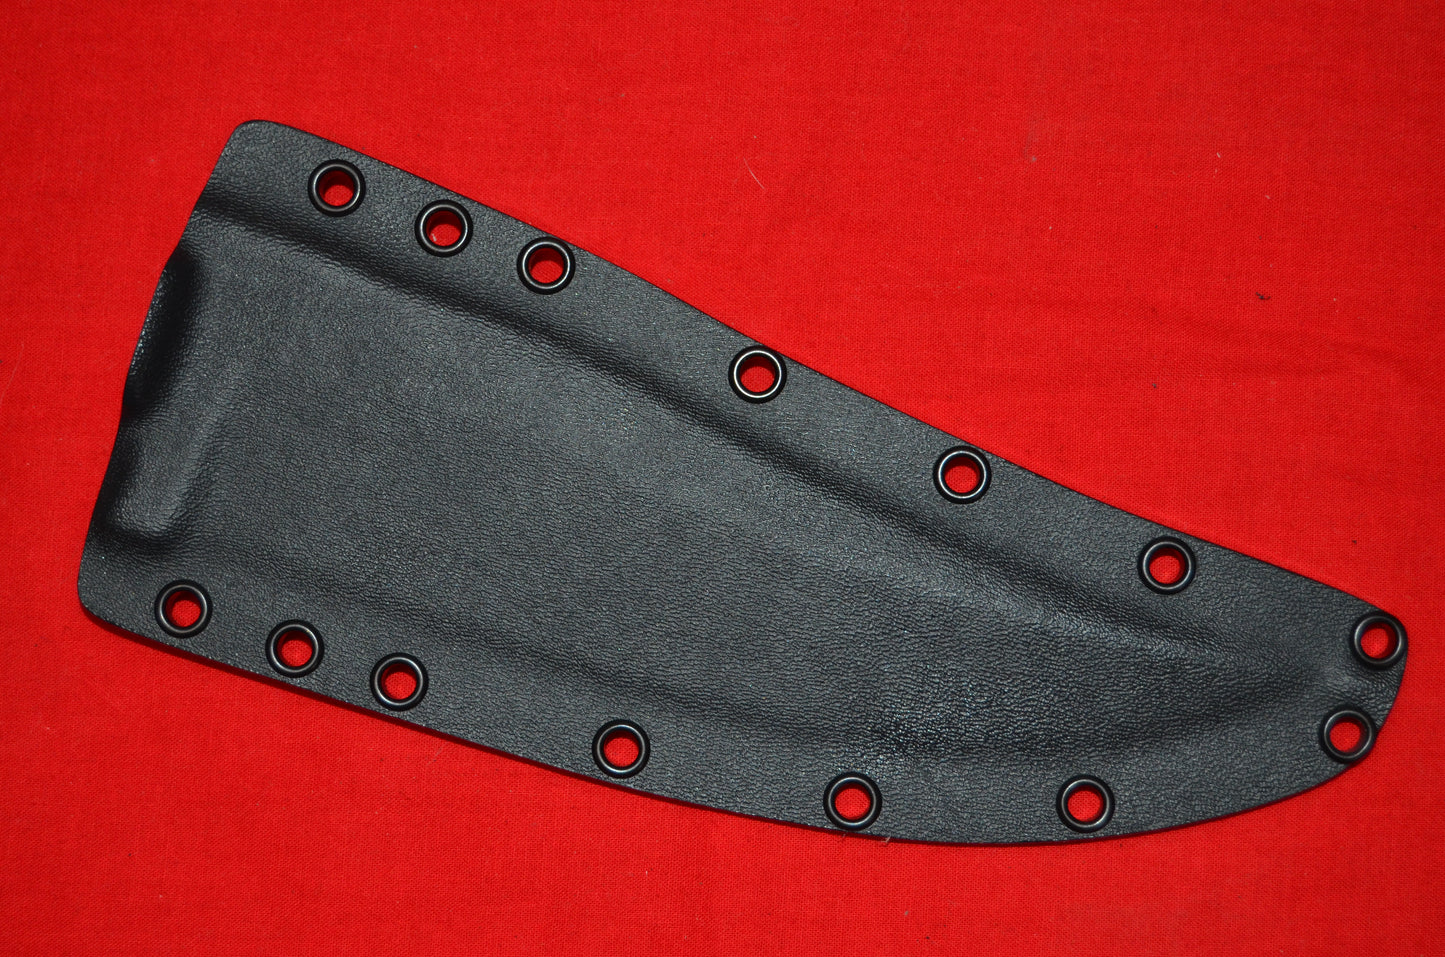 TOPS KNIVES PRATHER WAR BOWIE CUSTOM KYDEX SHEATH BY RED HILL SHEATHS (KNIFE NOT INCLUDED)